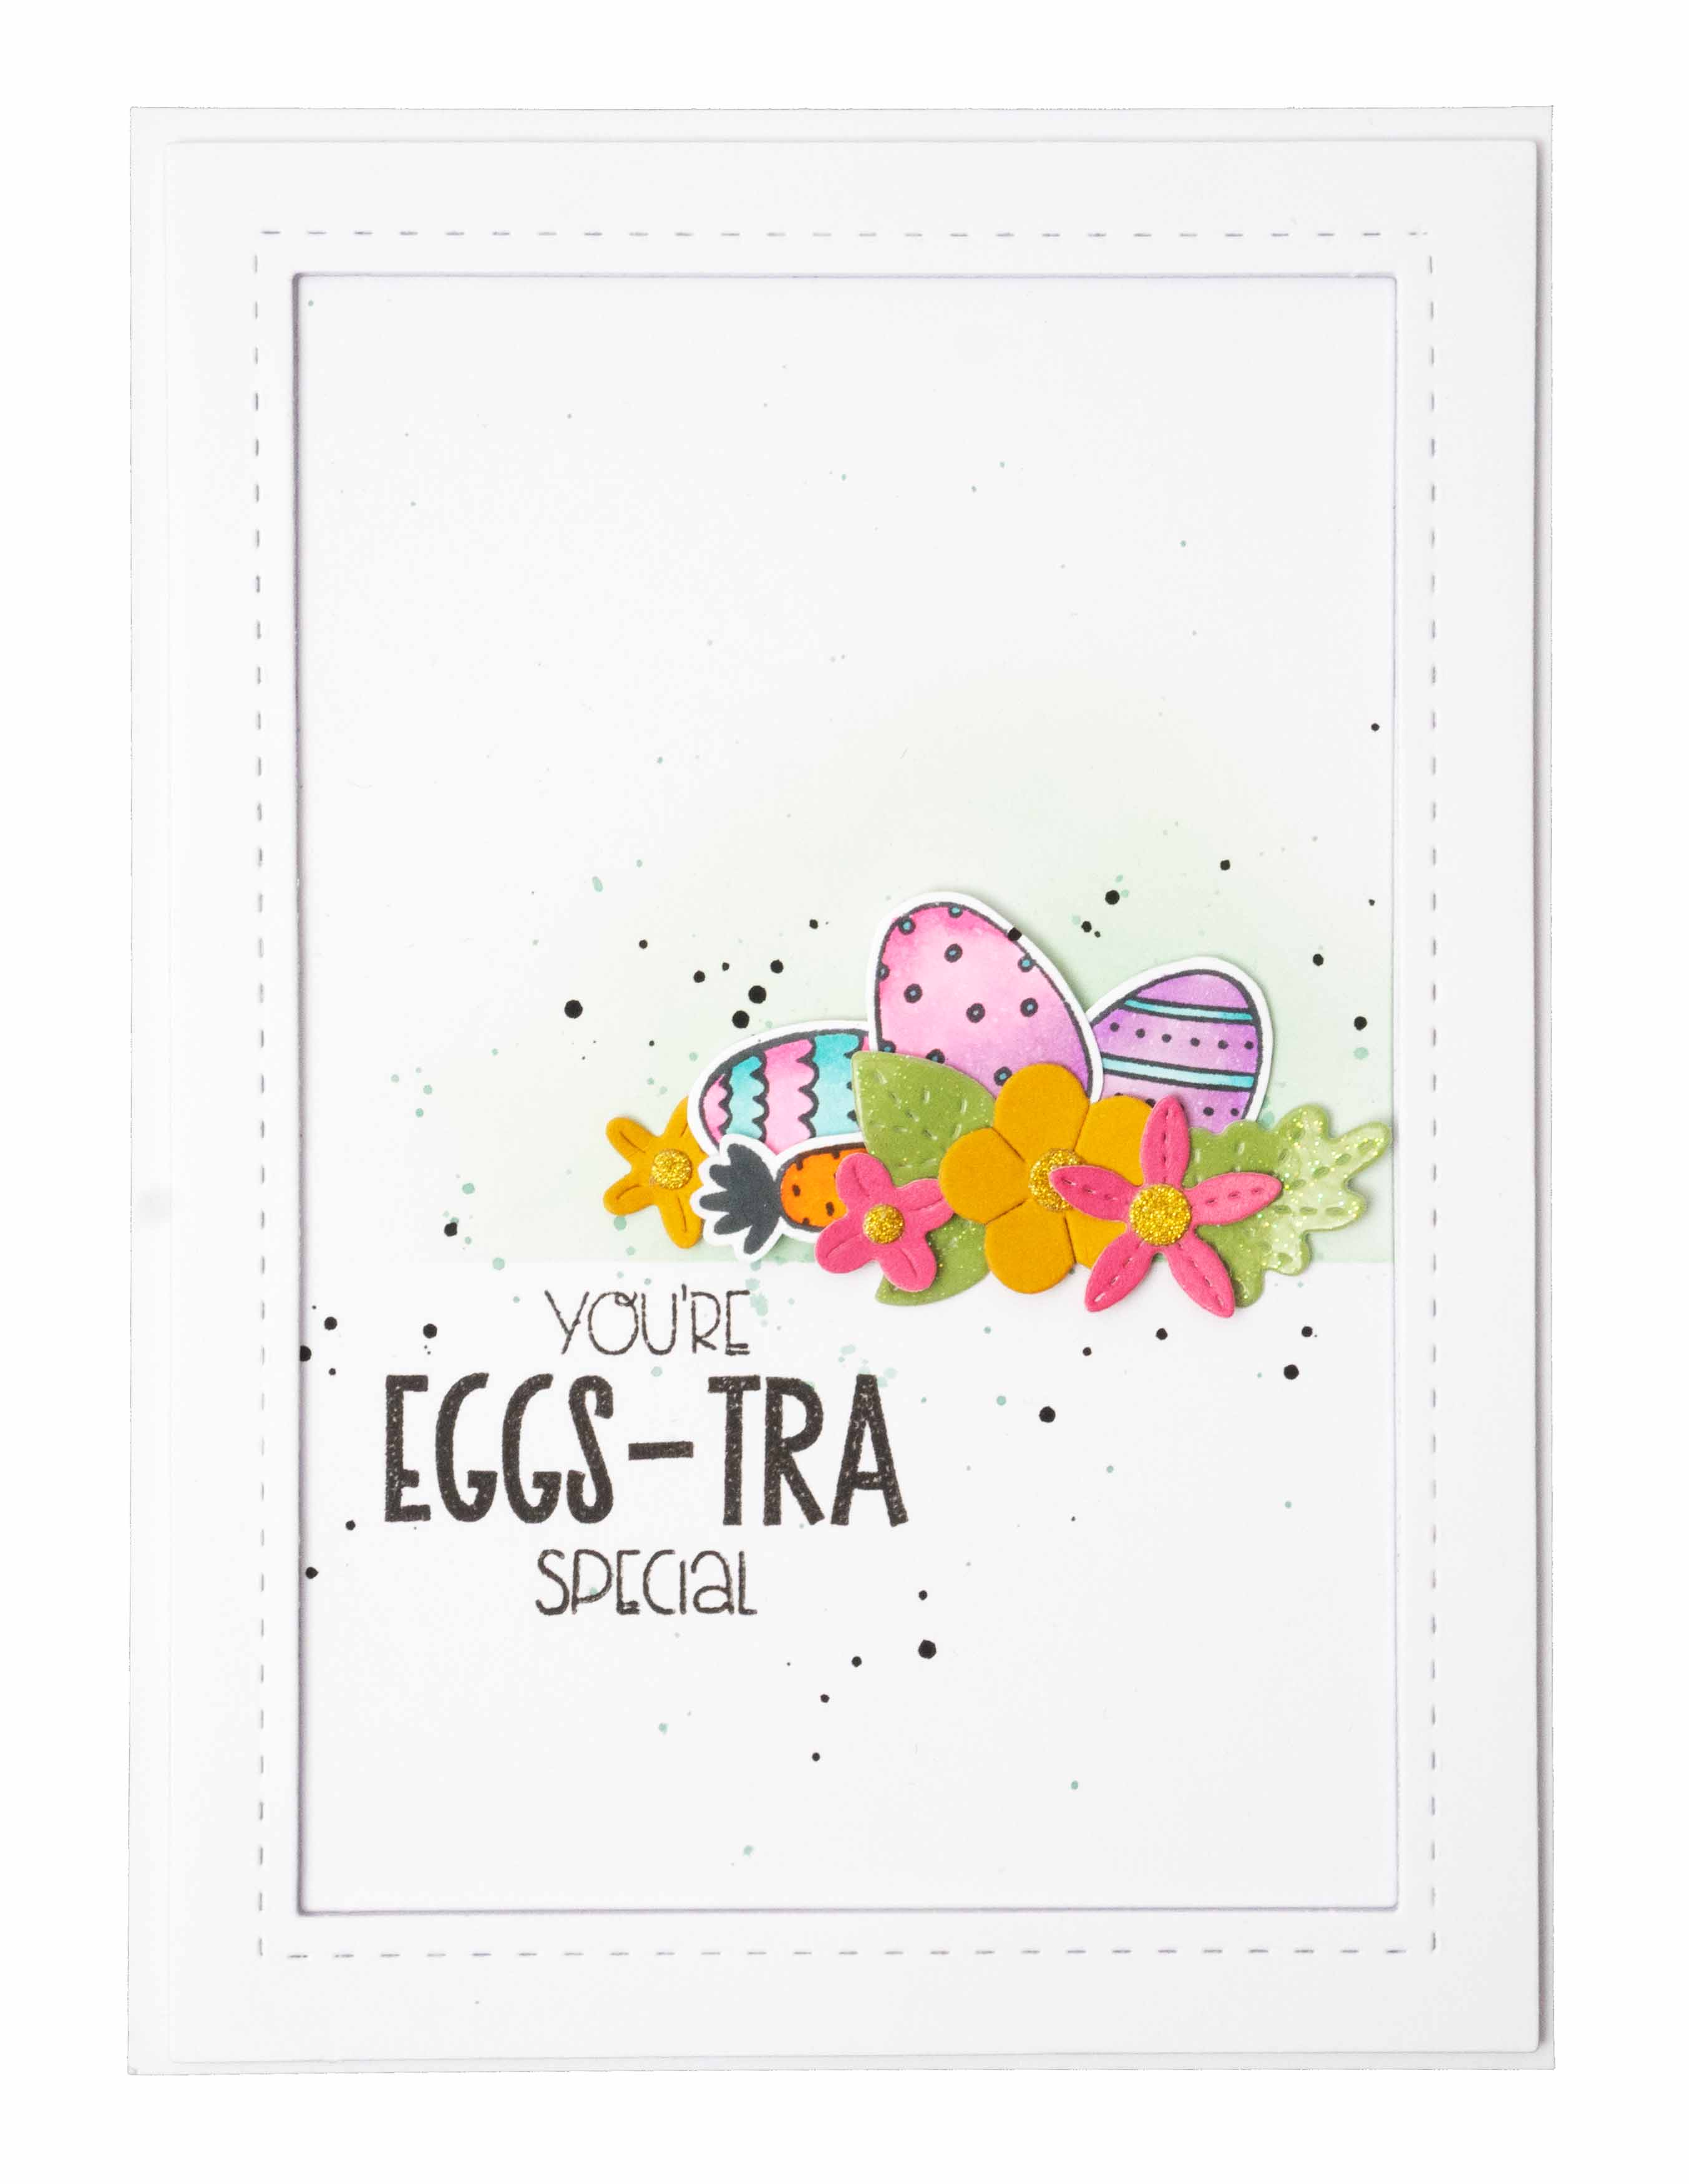 CCL Clear Stamp So Egg-cited Friendz 141x96x3mm 17 PC nr.416